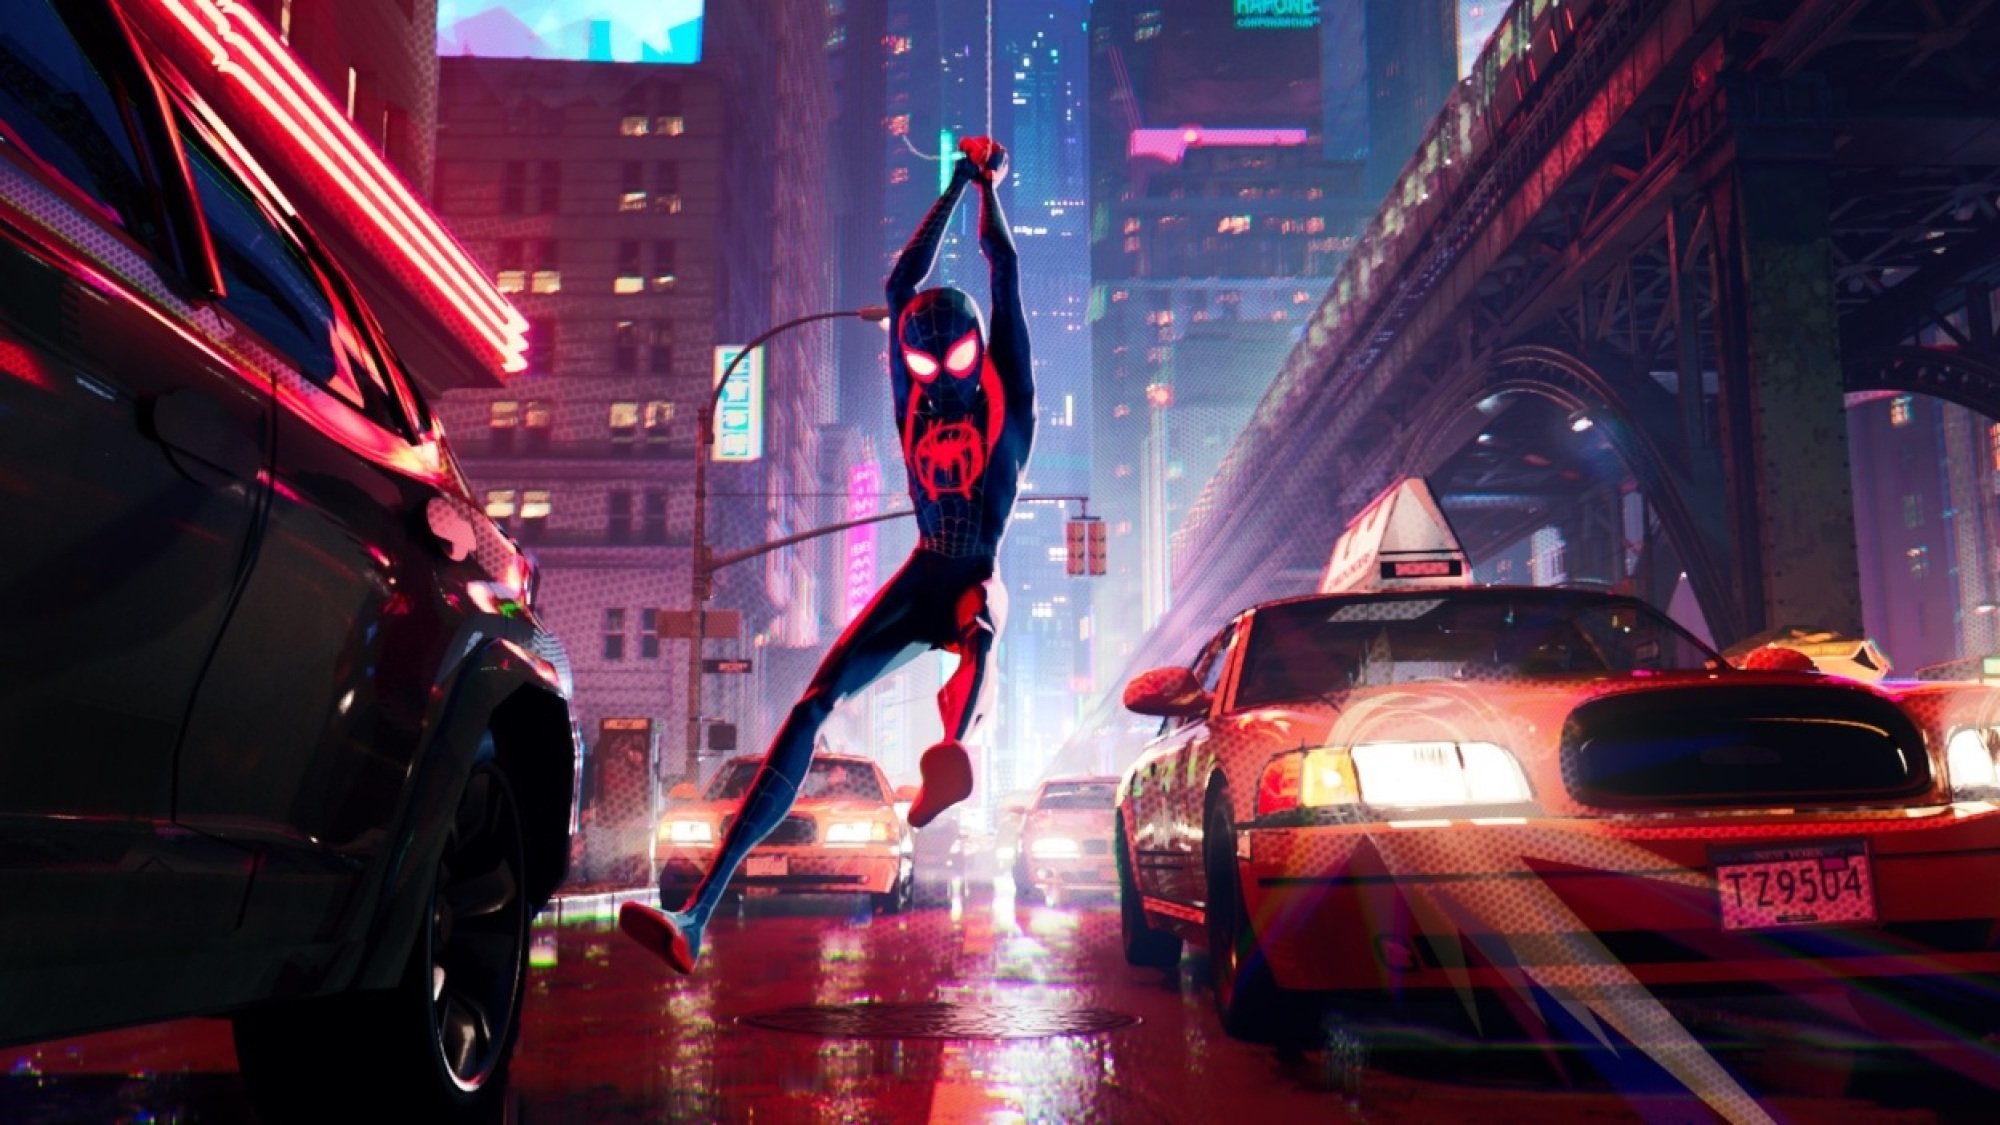 Miles Morales is Spider-Man in "Spider-Man: Into the Spider-Verse."